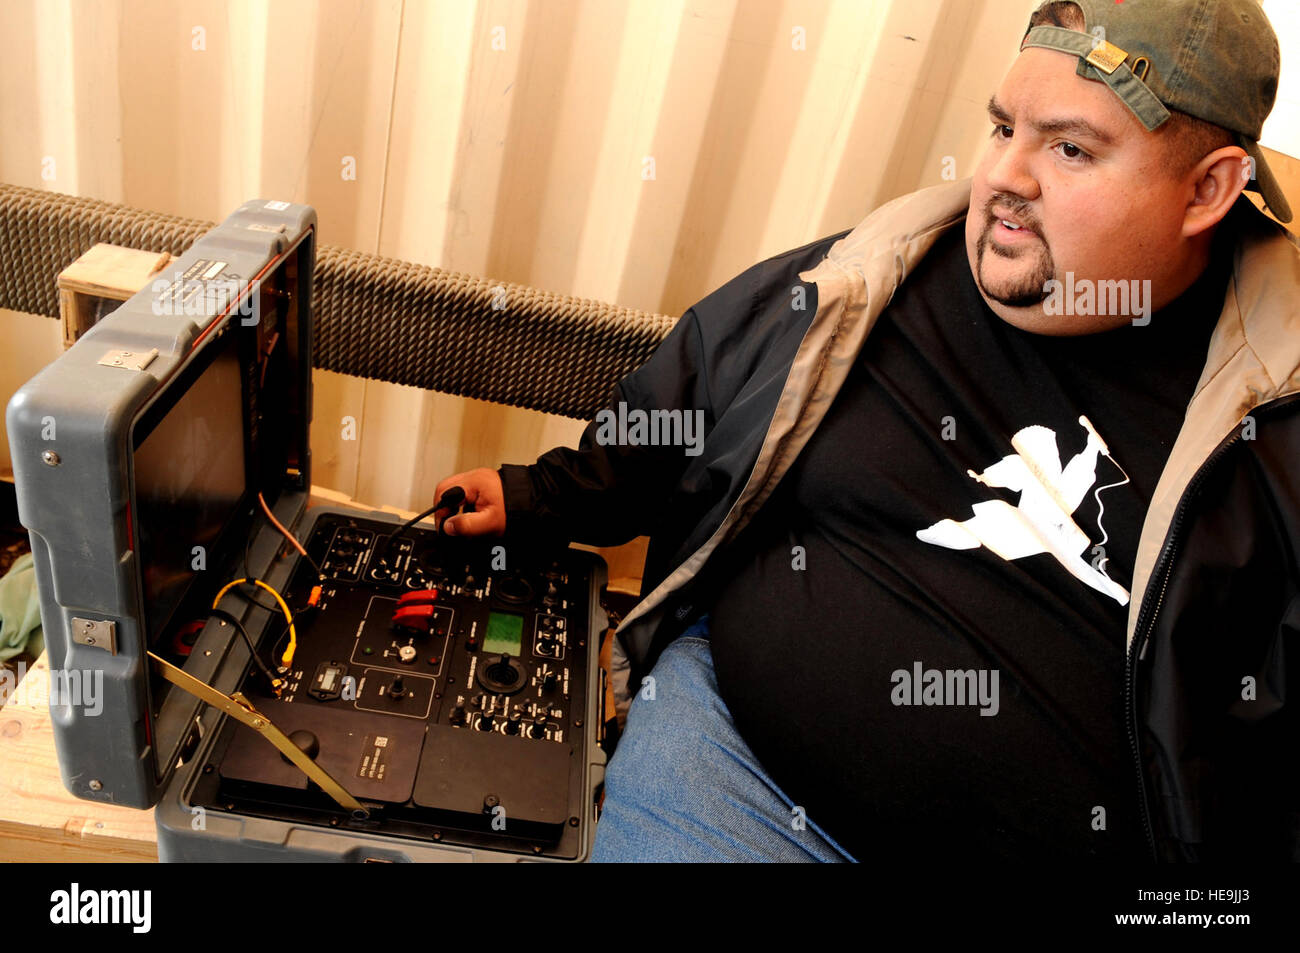 Comedian Gabriel Iglesias operates controls for a bomb disposal robot during a visit to Bagram Air Base, Afghanistan, Nov. 14, 2008. Iglesias is part of a USO group accompanying Vice Chairman of the Joint Chiefs of Staff U.S. Marine Gen. James E. Cartwright.  Air Force Master Sgt. Adam M. Stump. (Released) Stock Photo